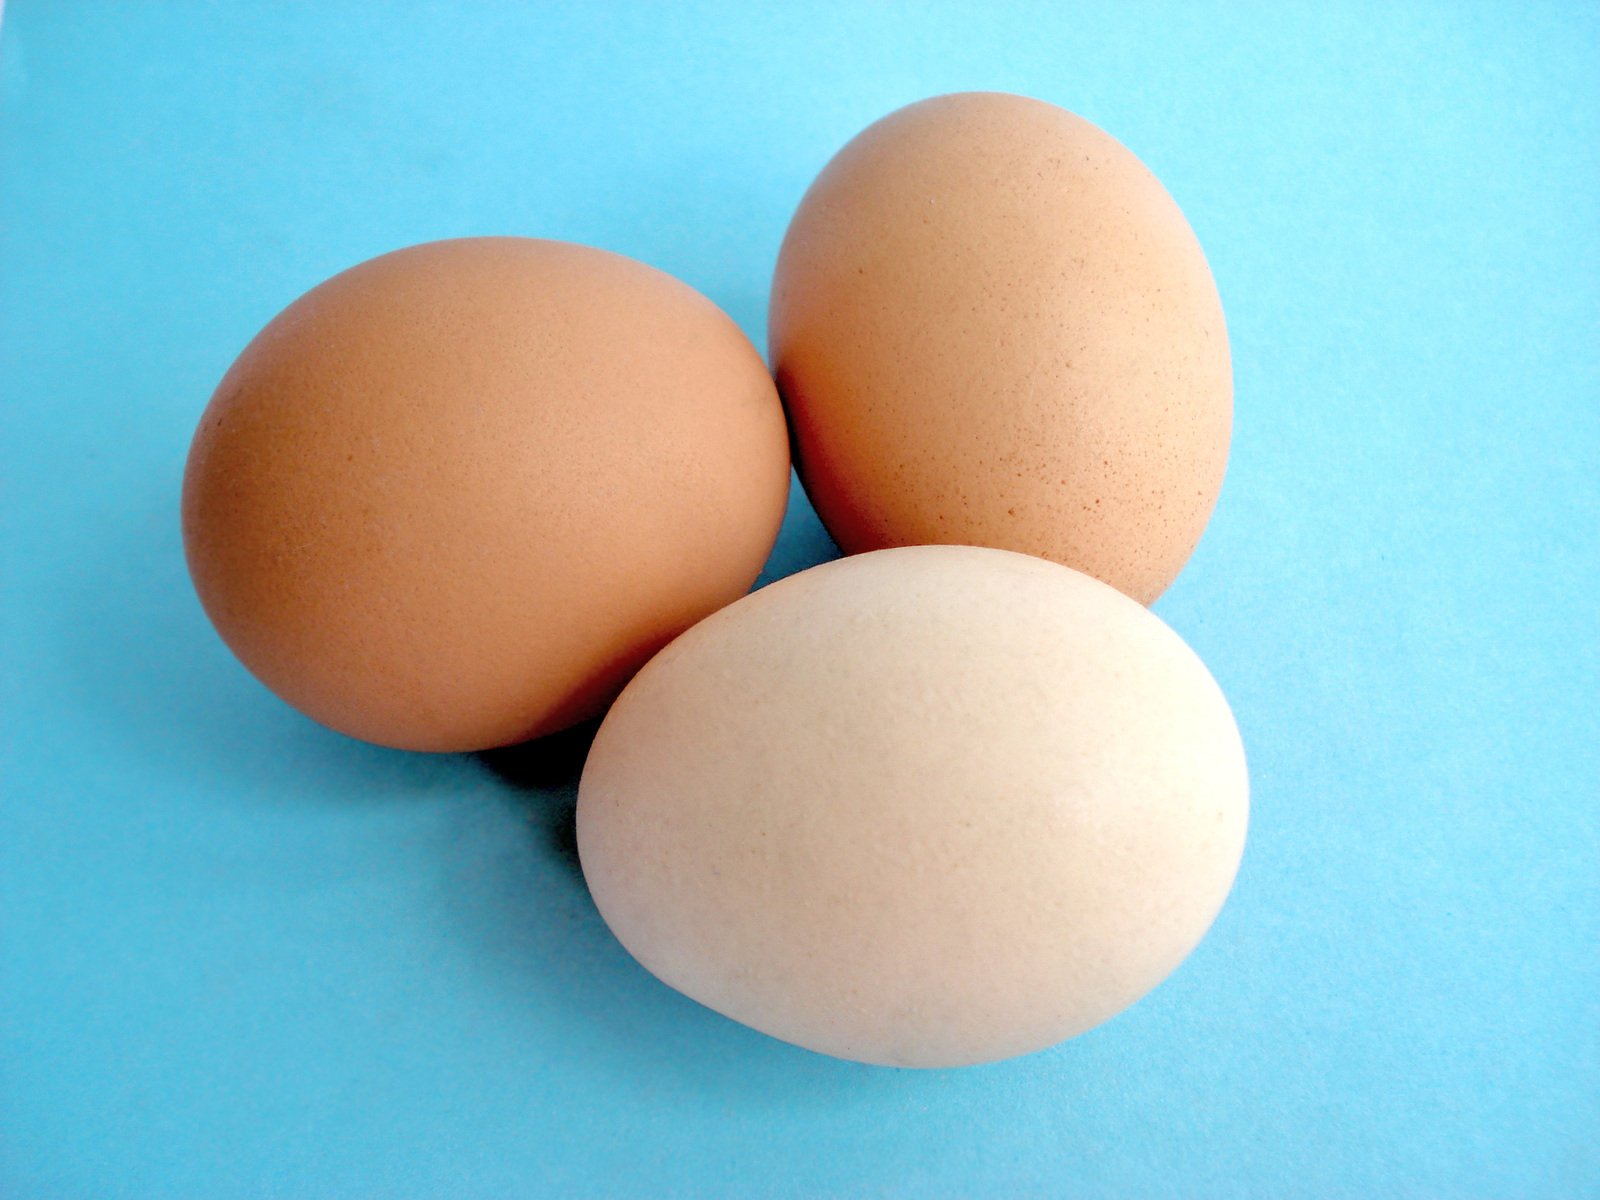 three eggs that are sitting on a blue surface